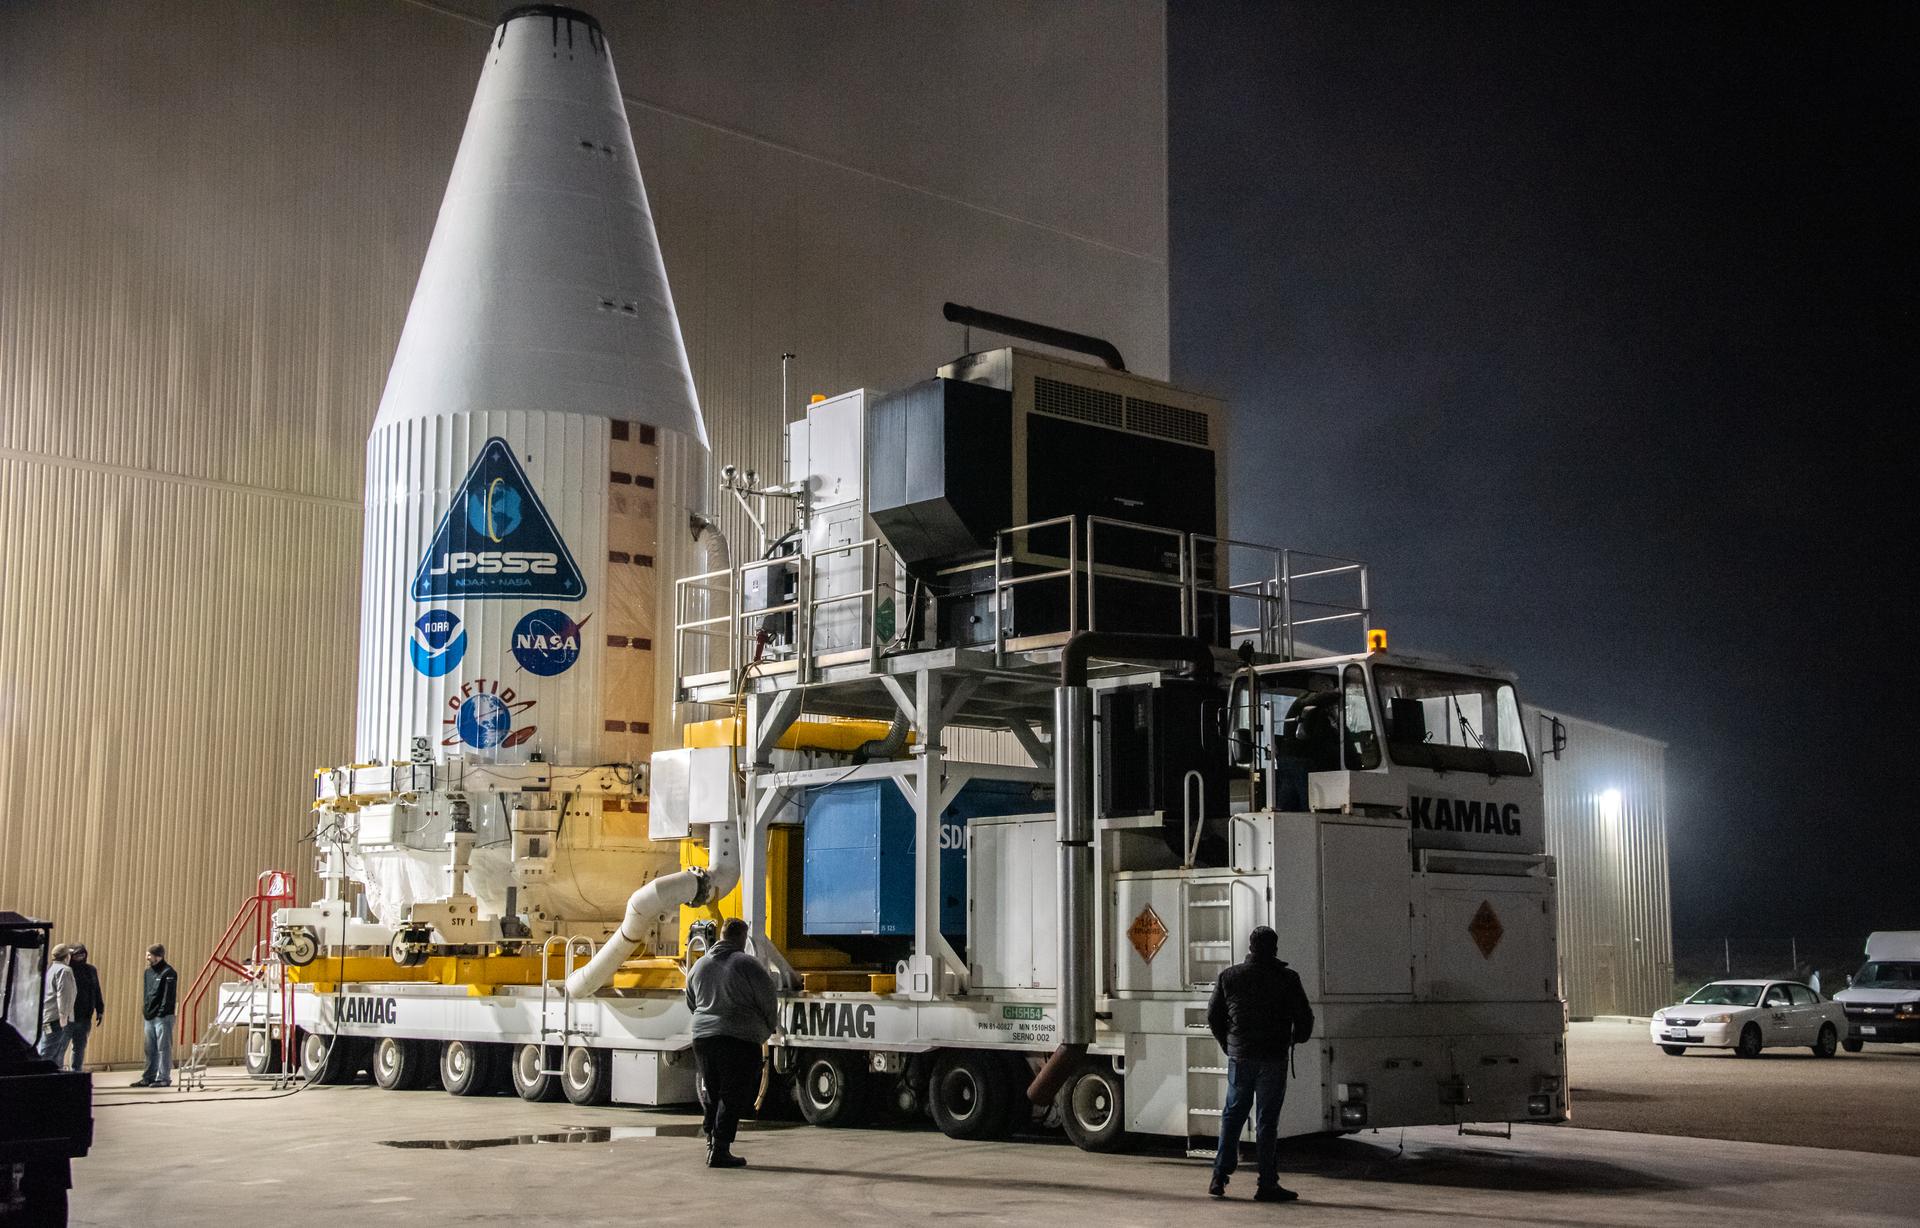 The United Launch Alliance Atlas V payload fairing containing the National Oceanic and Atmospheric Administration’s (NOAA) Joint Polar Satellite System-2 (JPSS-2) is readied at Space Launch Complex 3 at Vandenberg Space Force Base.